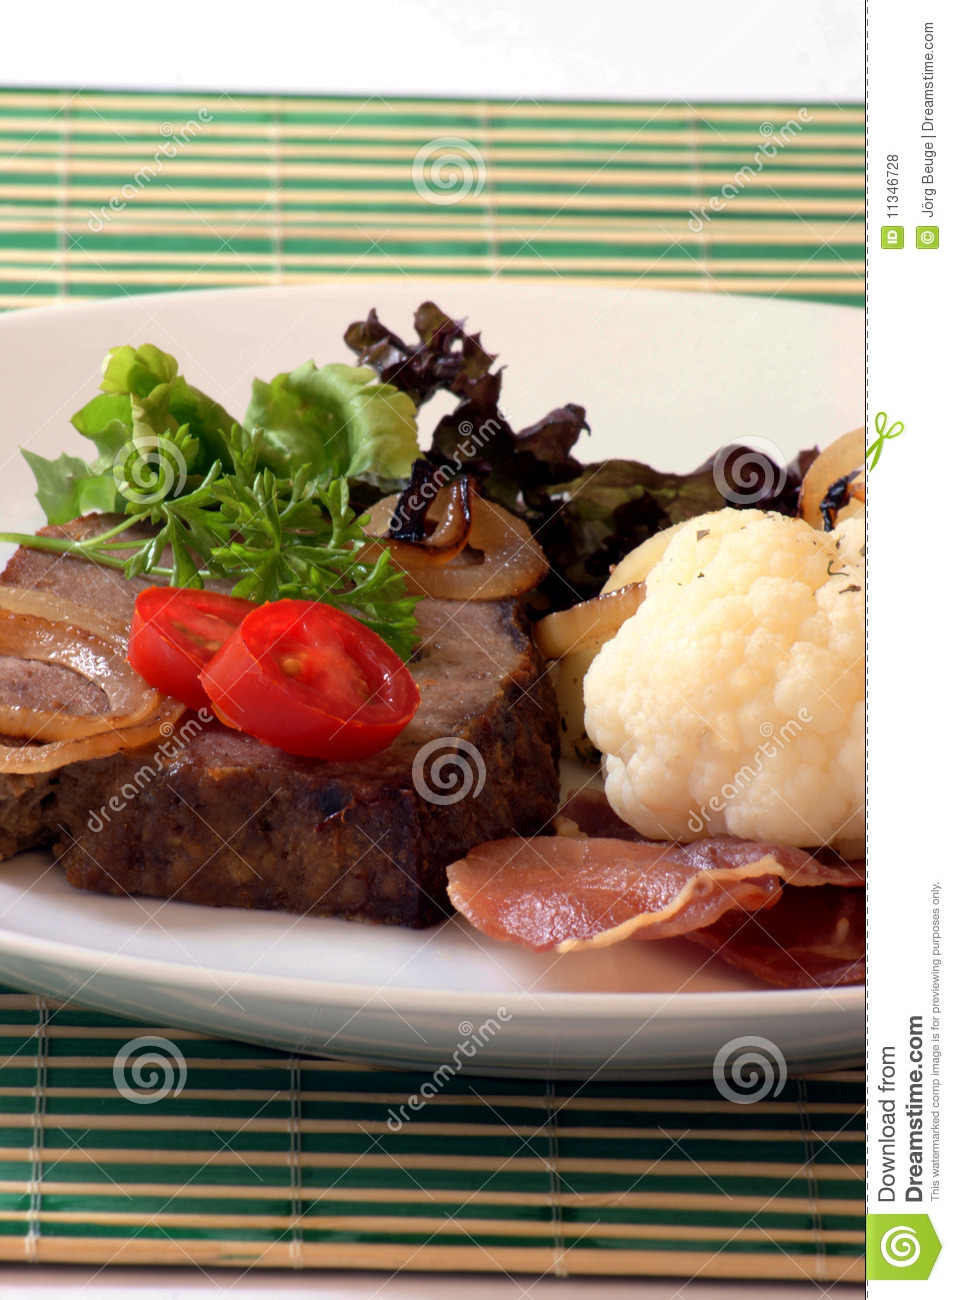 Sliced Meat Loaf With Vegetable On A Plate Royalty Free Stock Photos